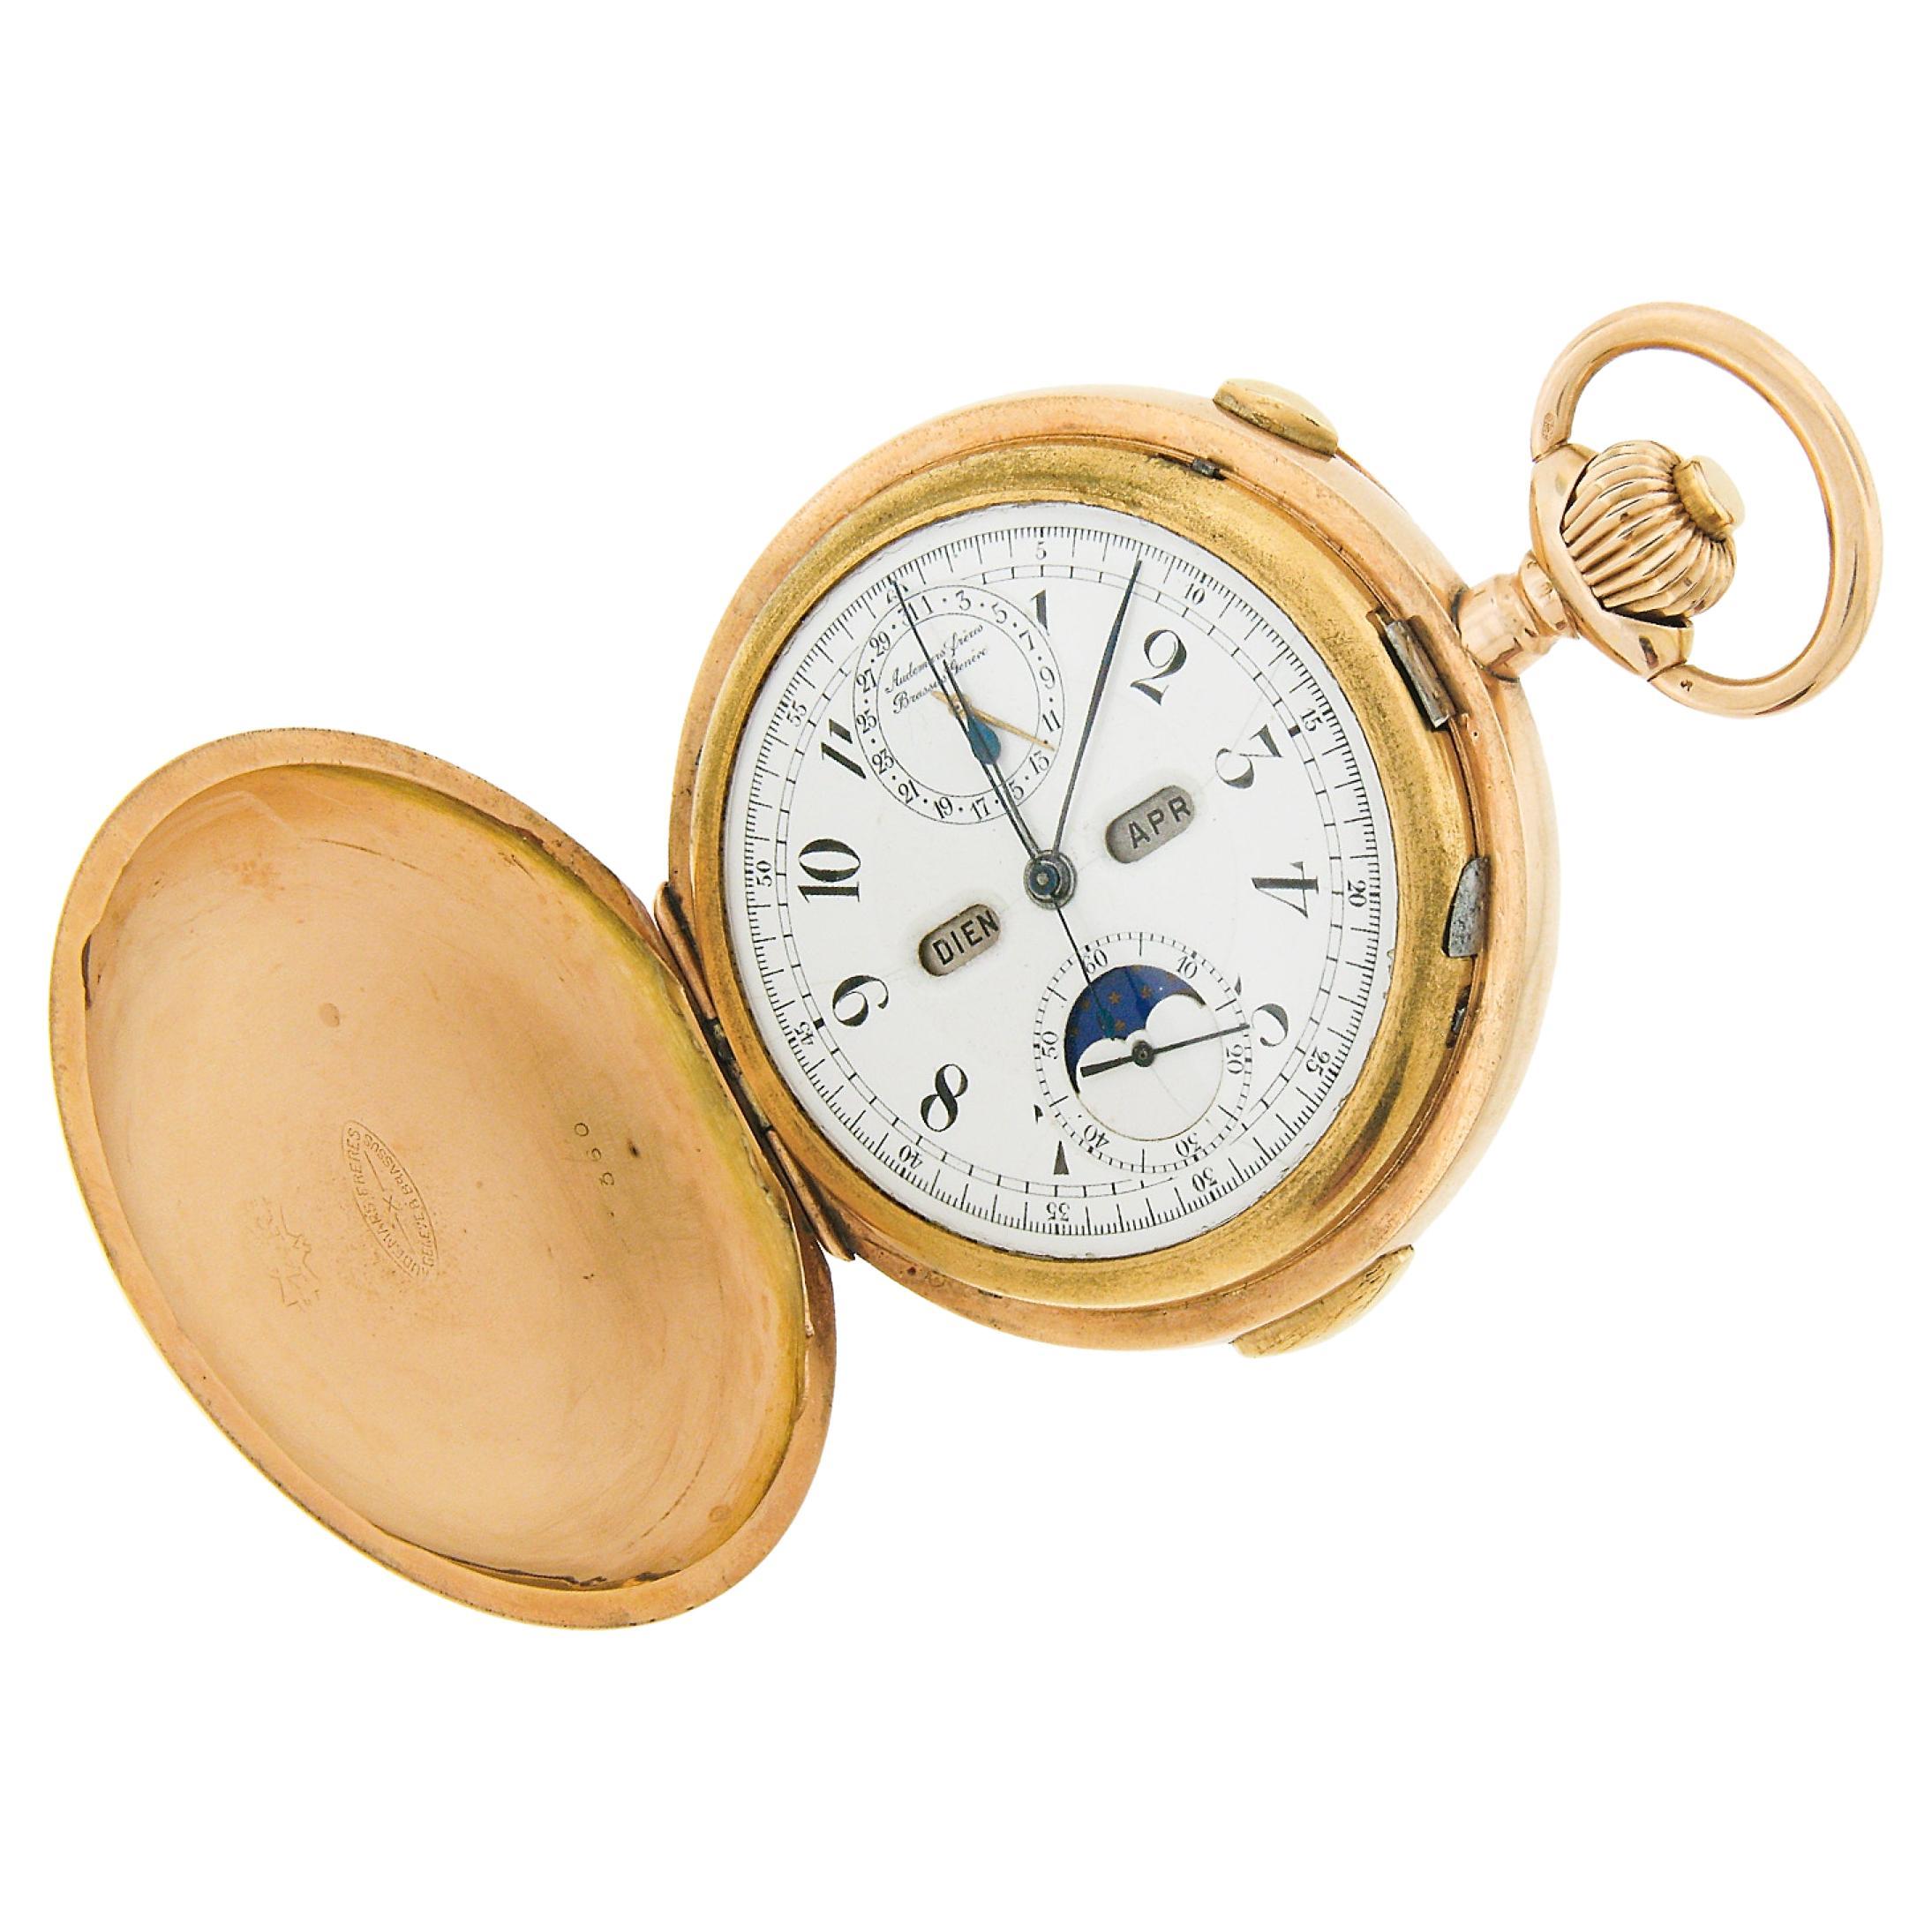 Audemars Freres 14K Gold 1/4 Hour Repeater Moon Phase Chronograph Pocket Watch For Sale